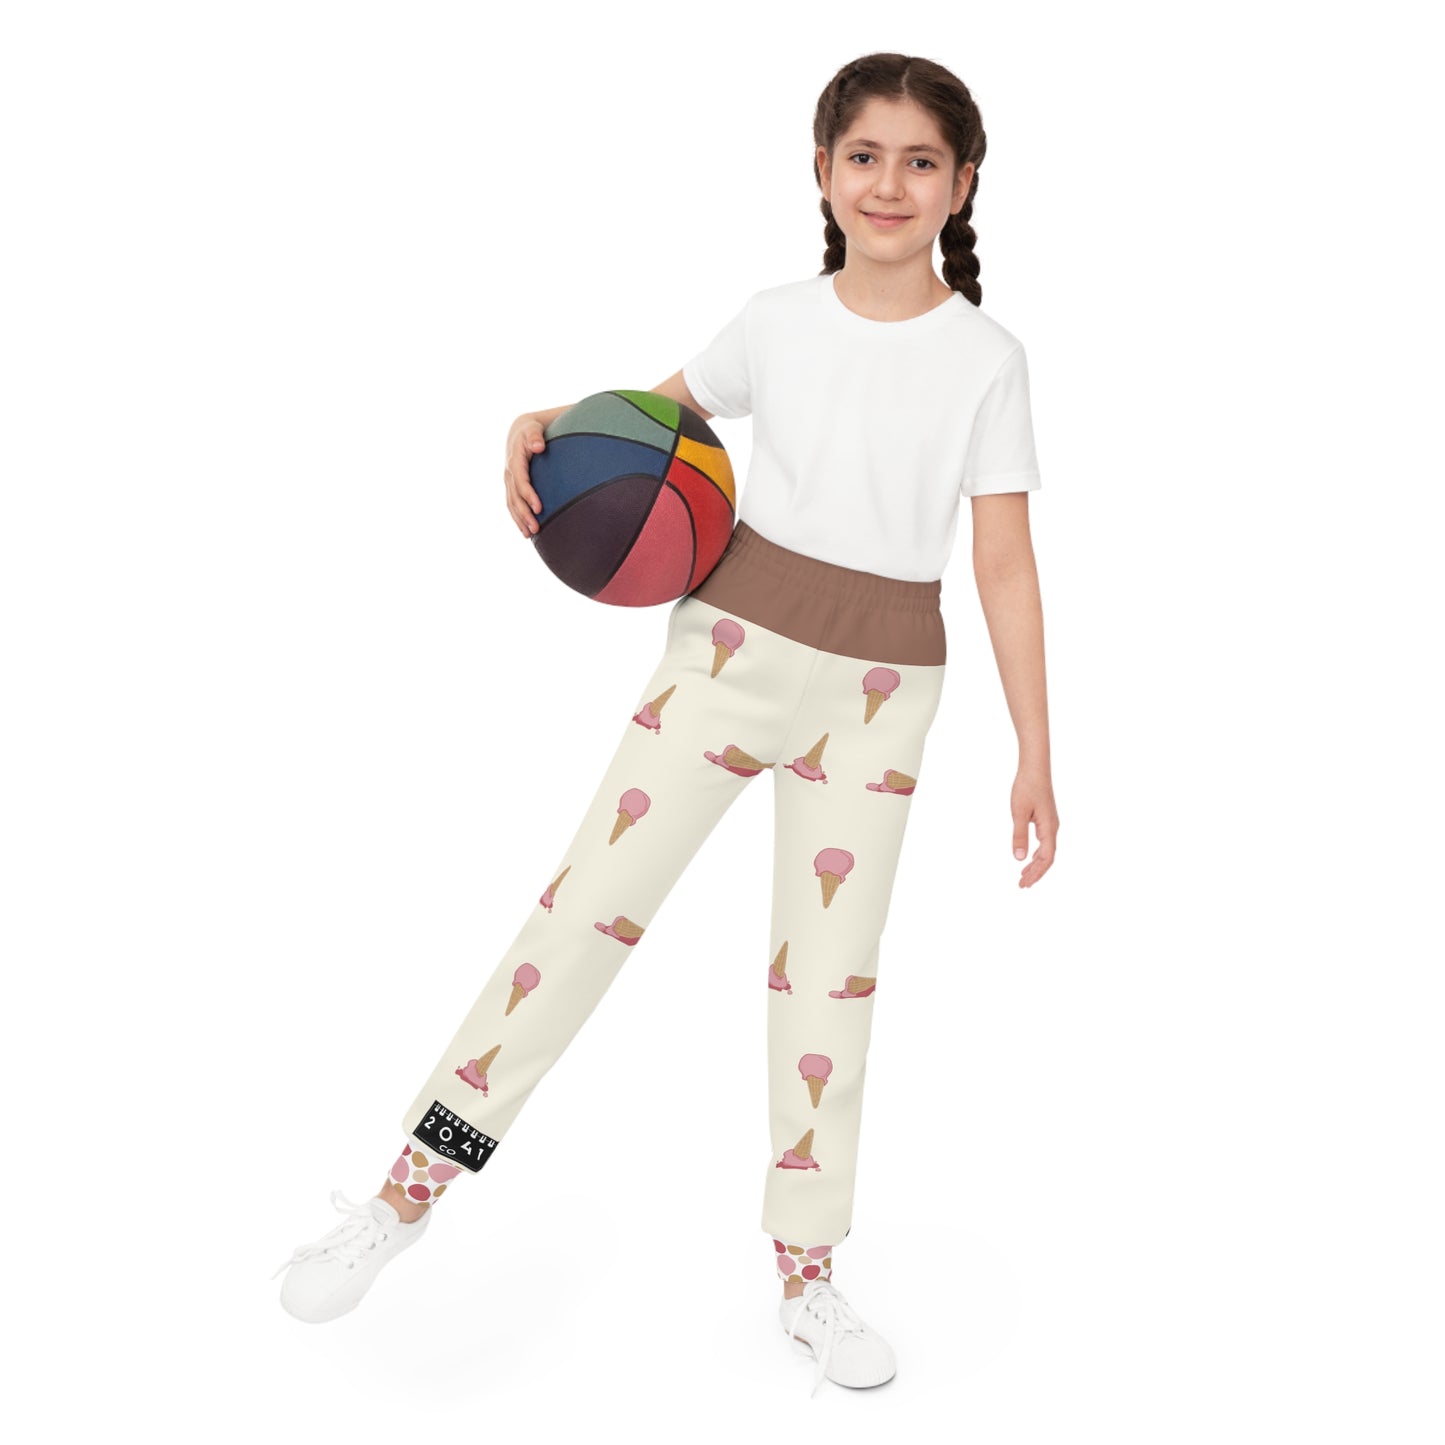 2041 CO YOUTH JOGGERS ICE CREAM | STRAWBERRY - 2041co